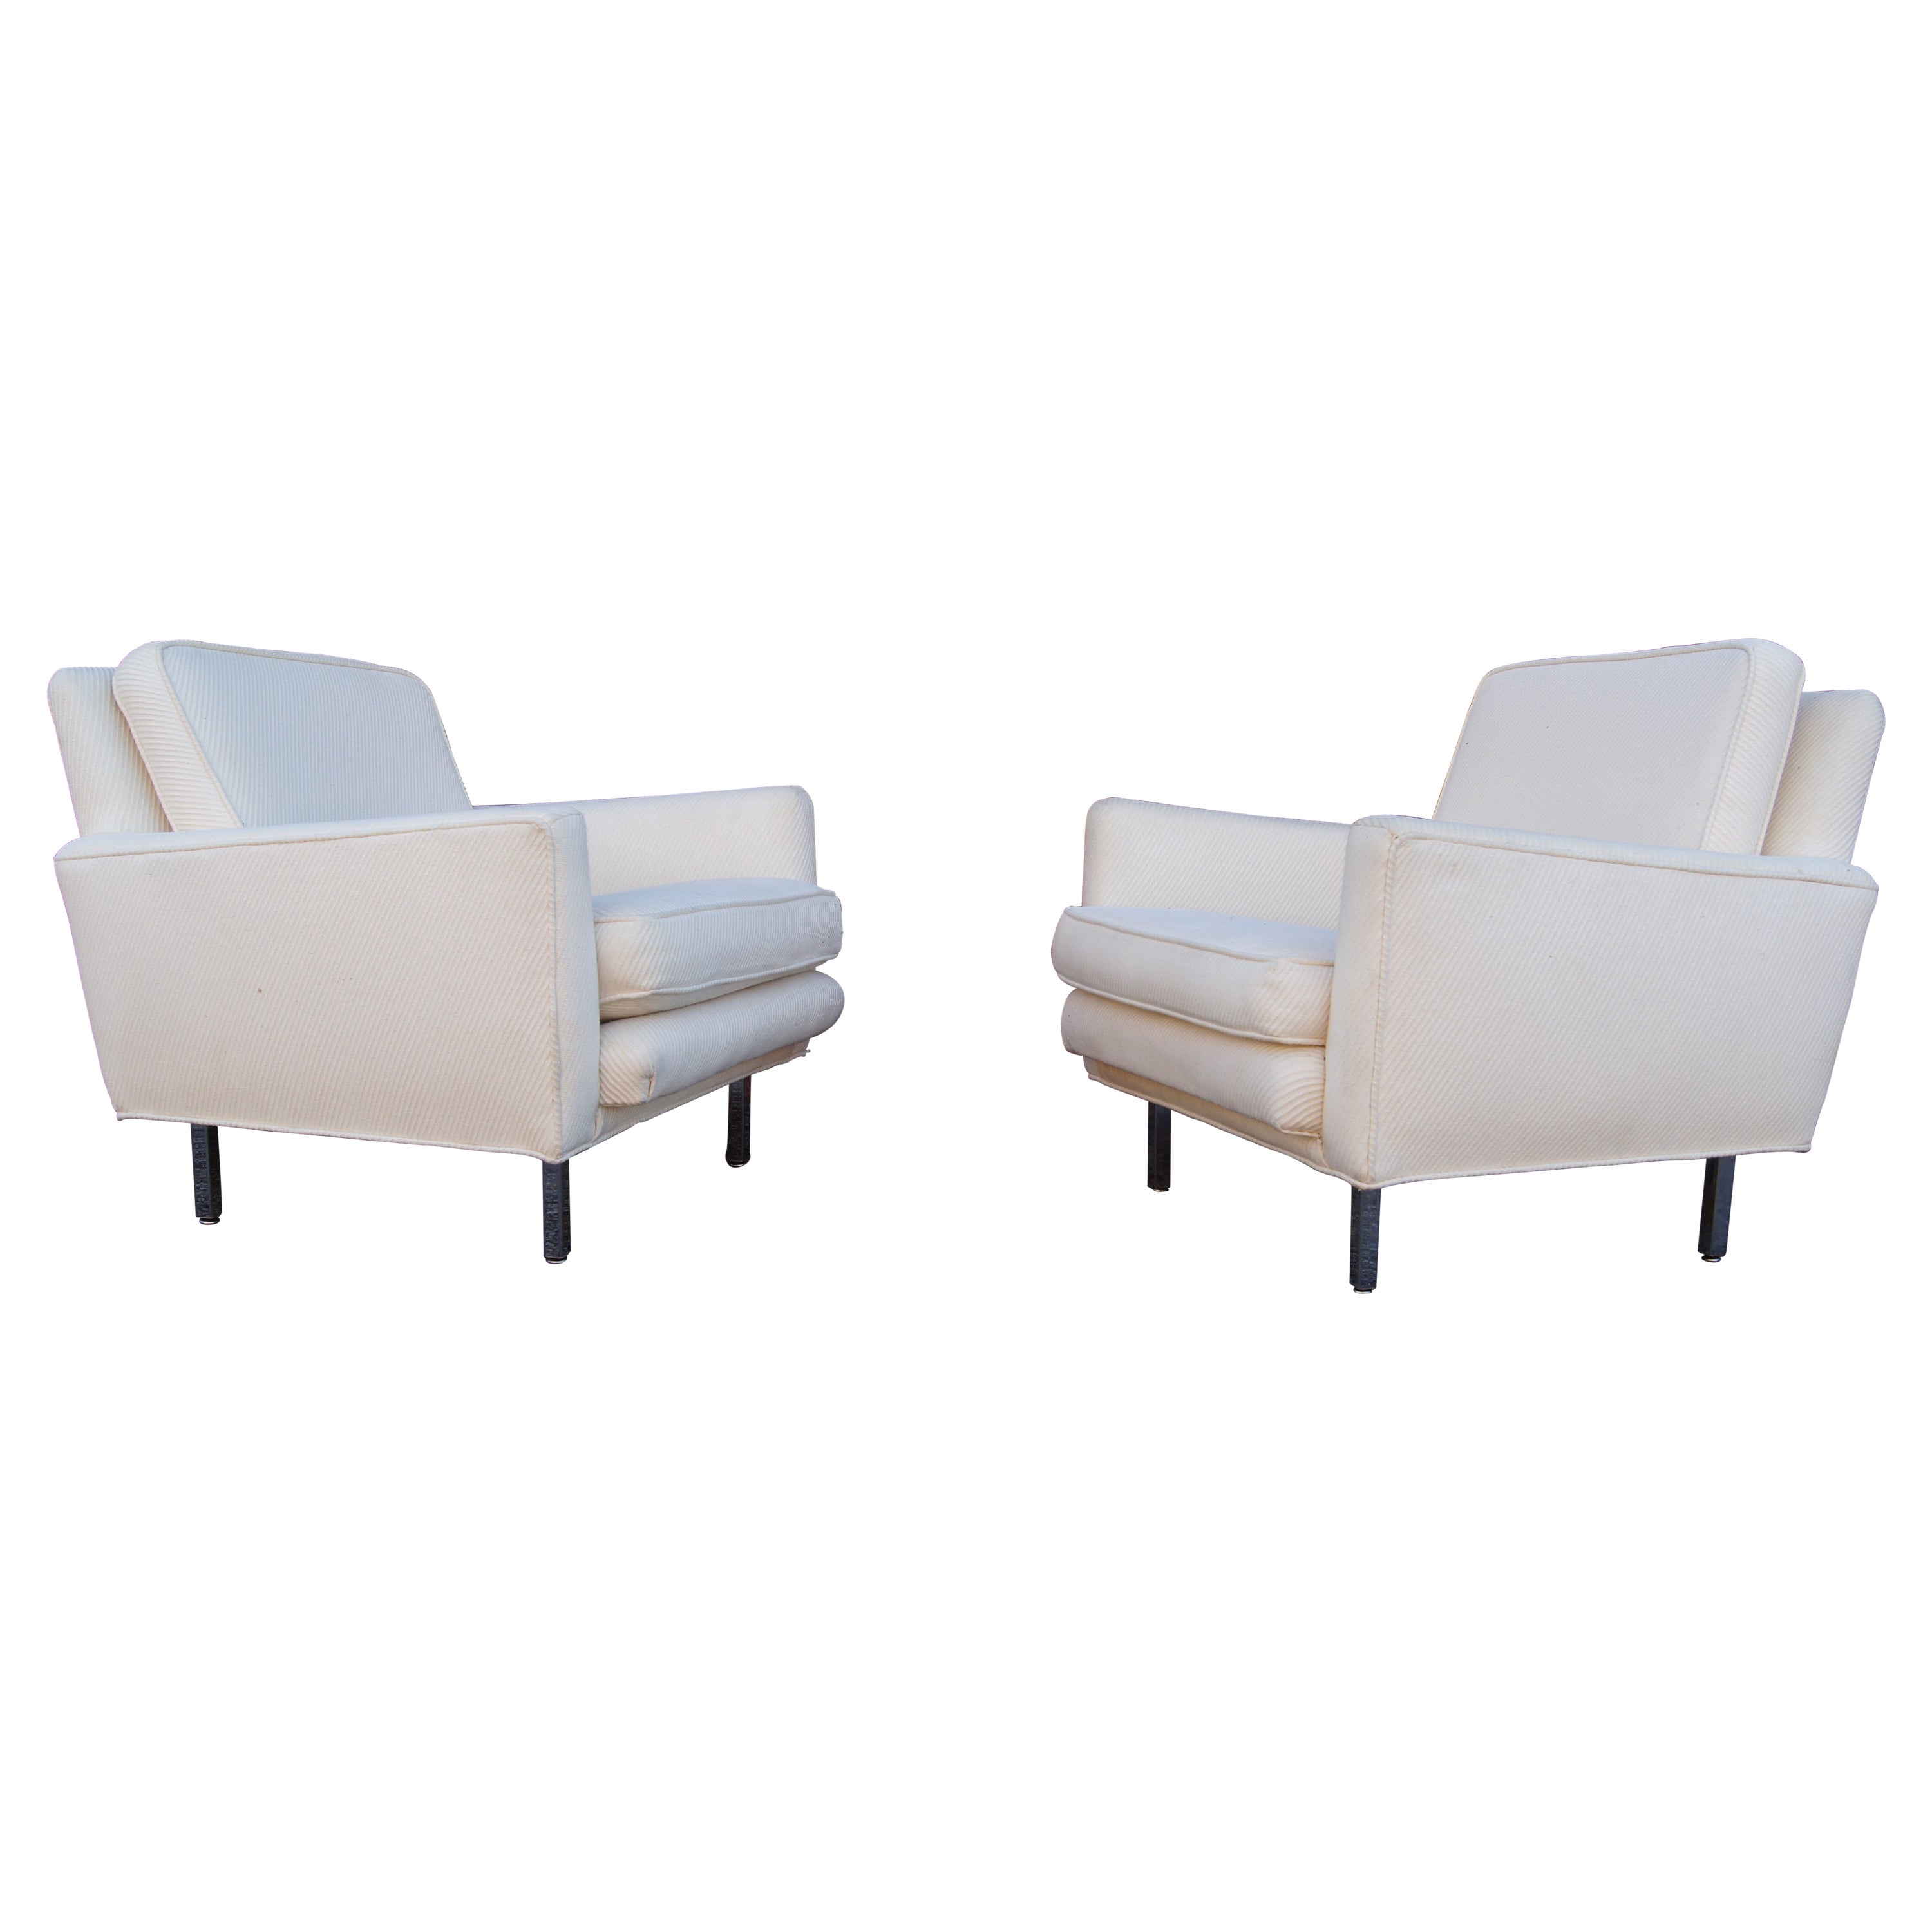 Pair of Lounge Chairs, Model 5681, by George Nelson for Herman Miller